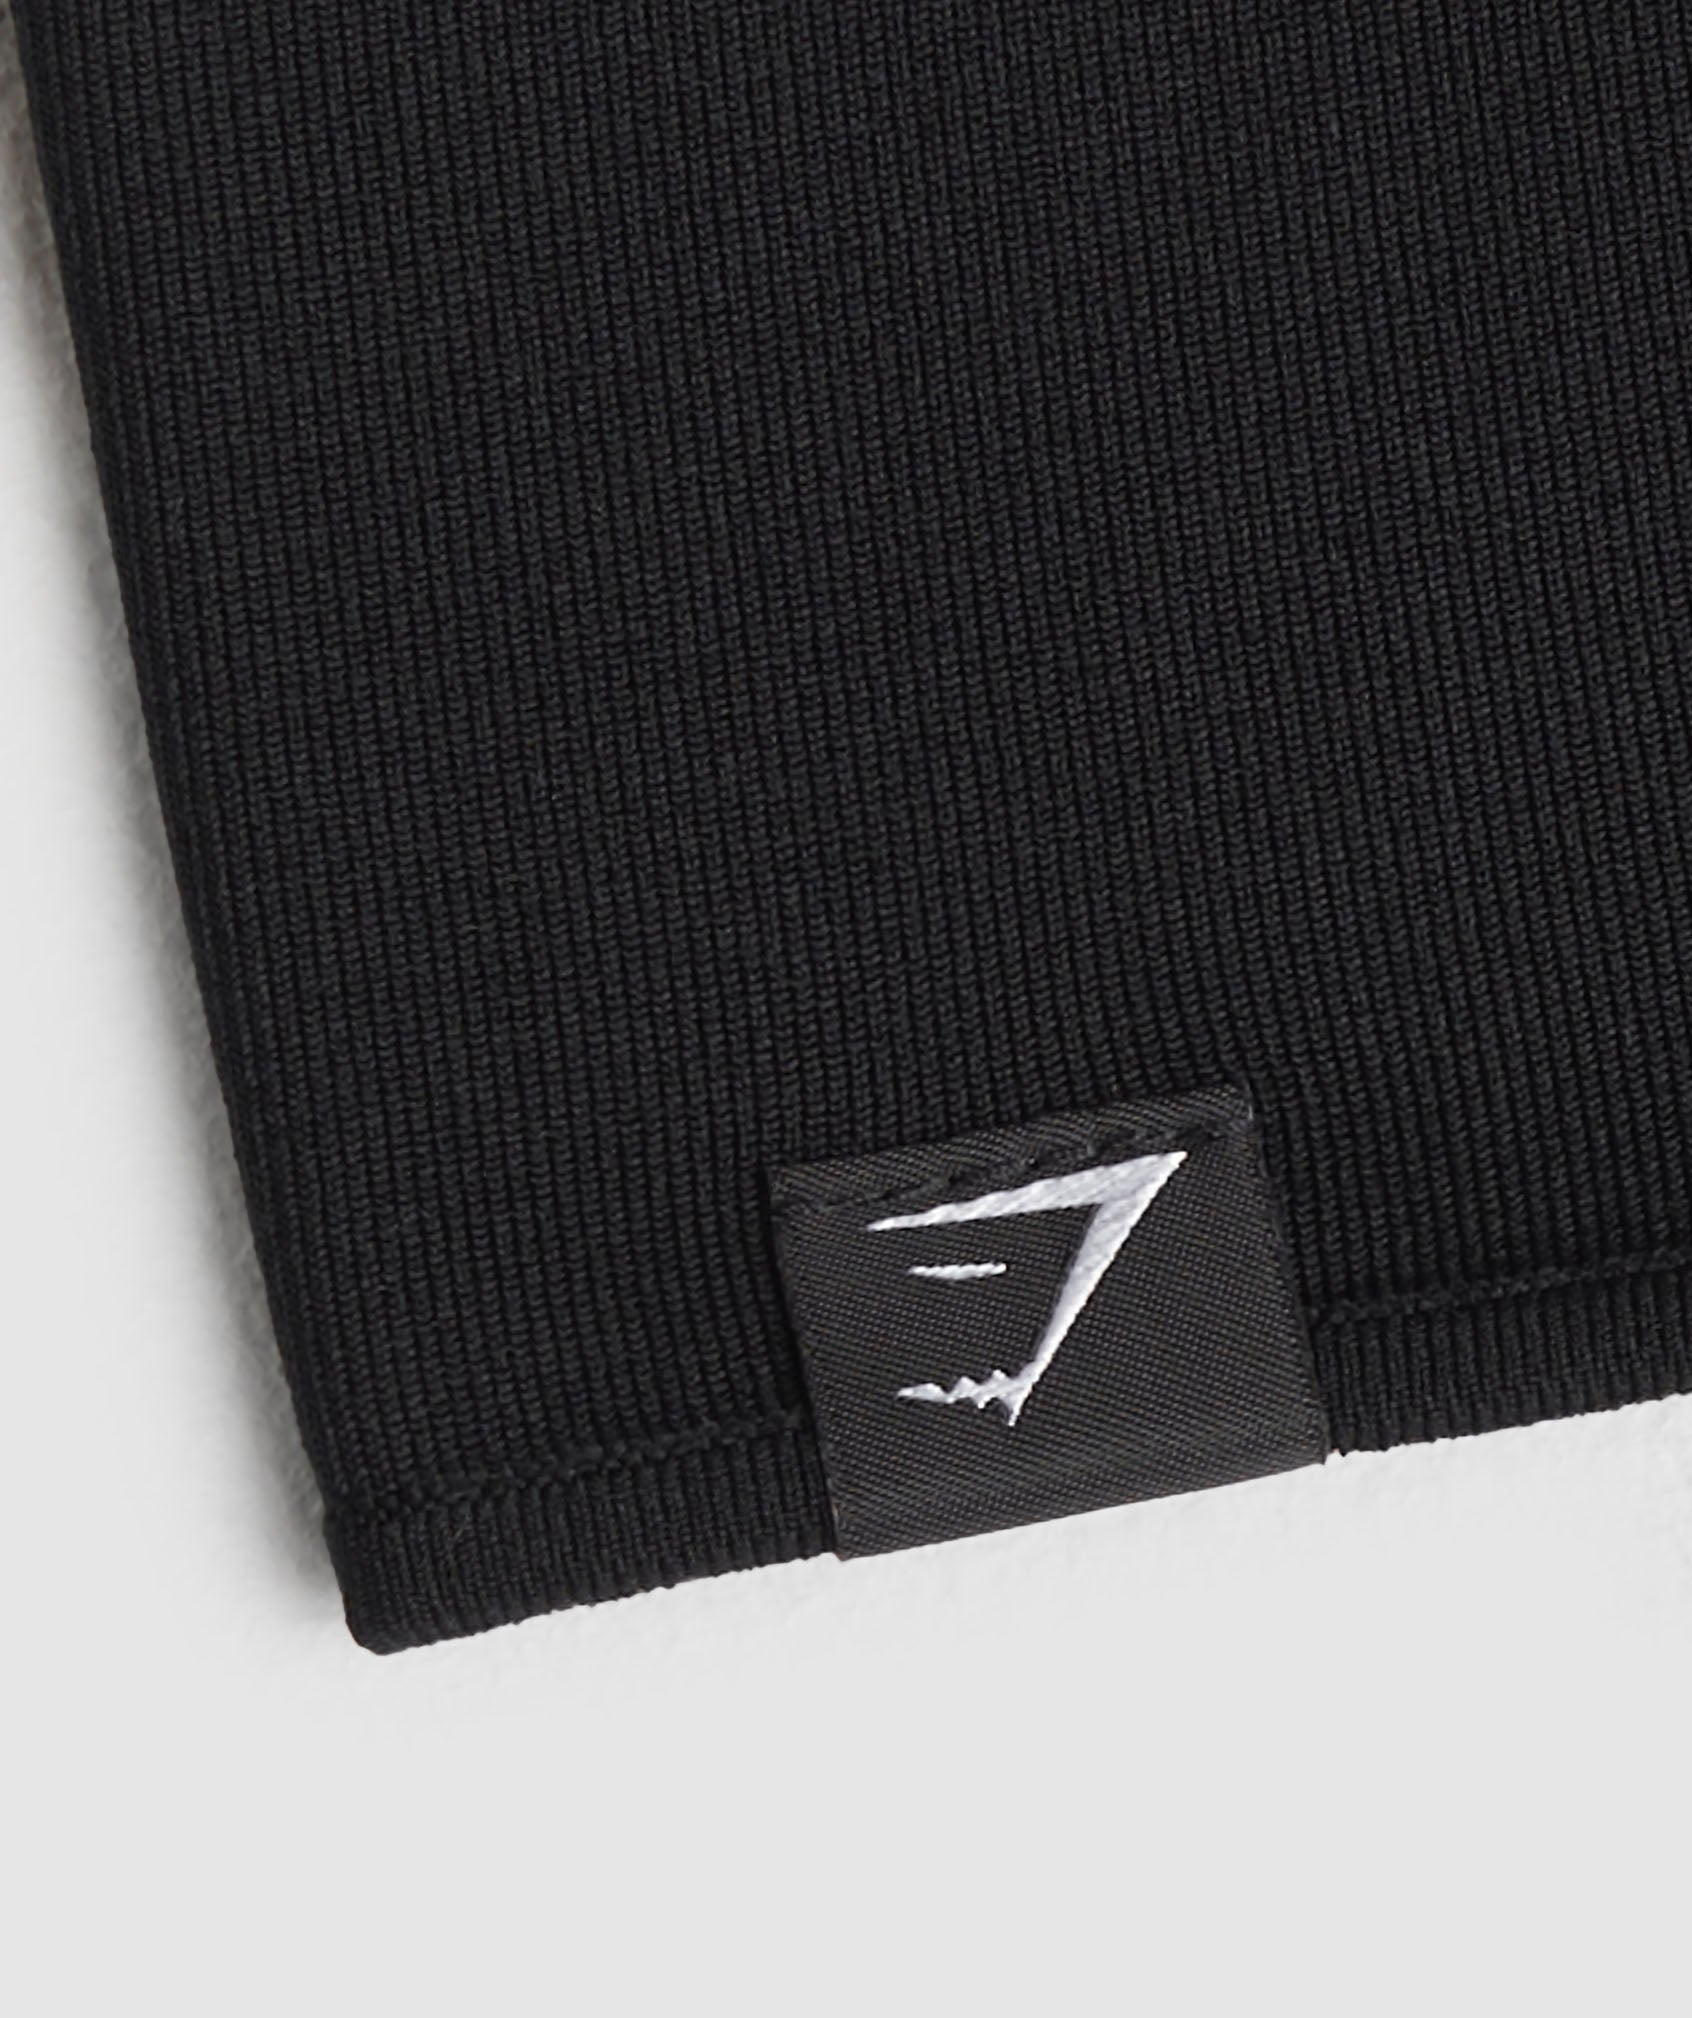 Gymshark have created a sweat headband specifically for textured hair